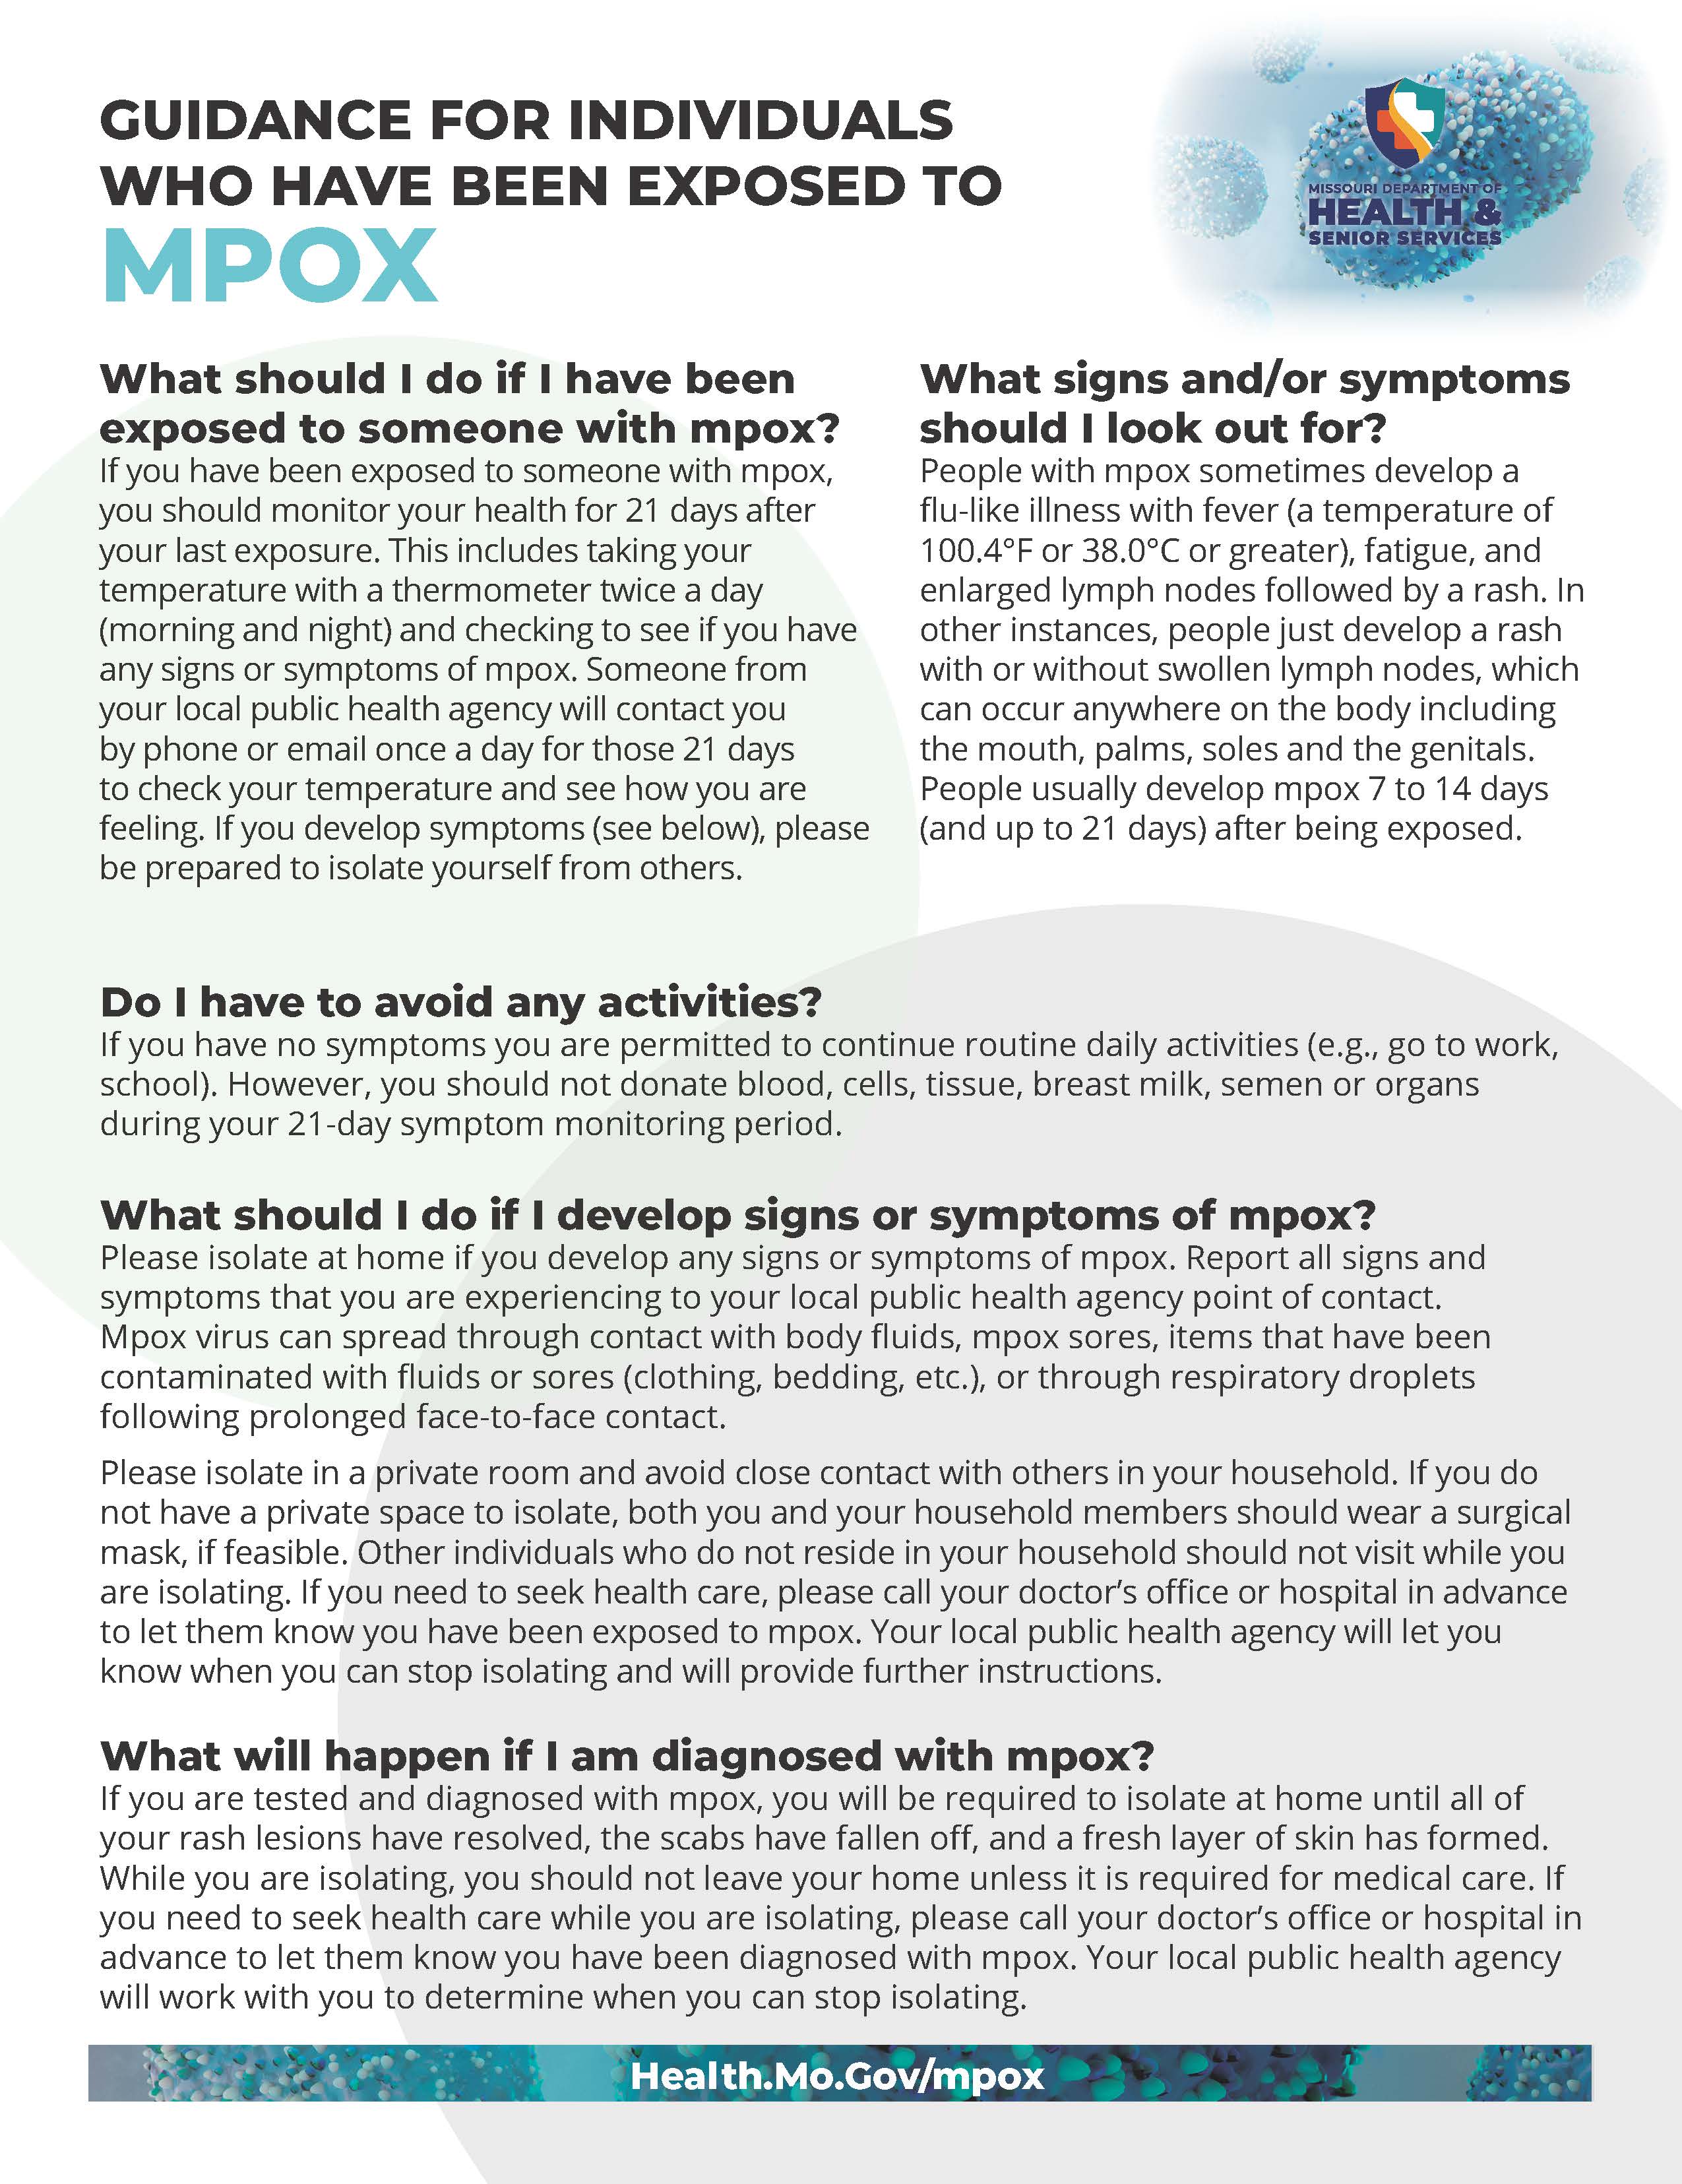 Guidance for Individuals Who Have Been Exposed to Mpox